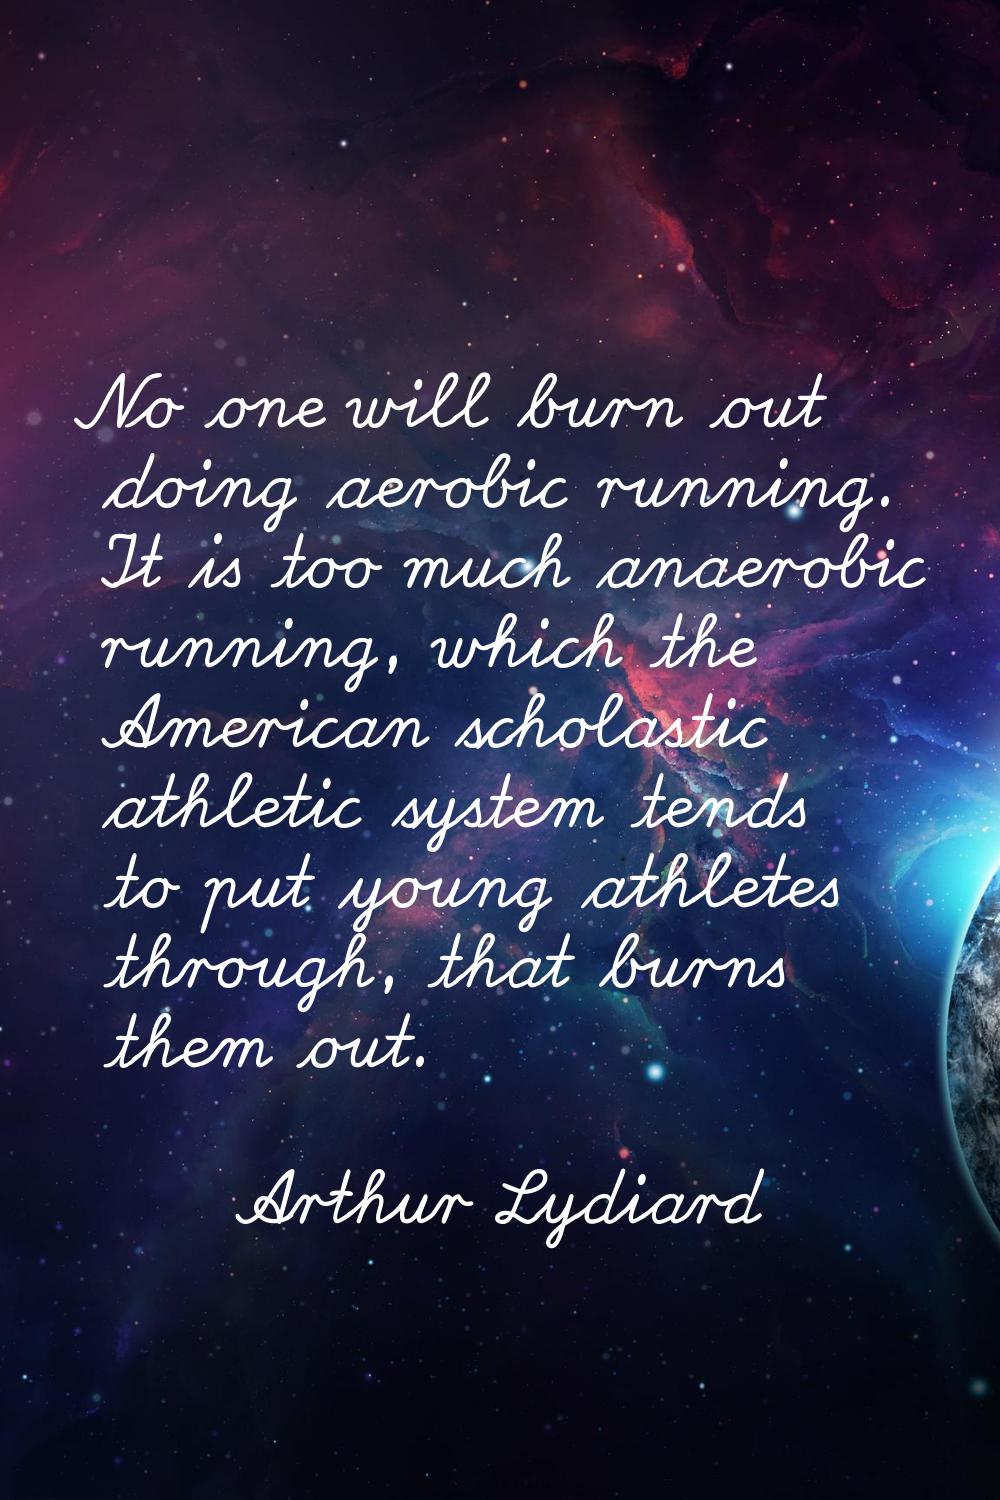 No one will burn out doing aerobic running. It is too much anaerobic running, which the American sc